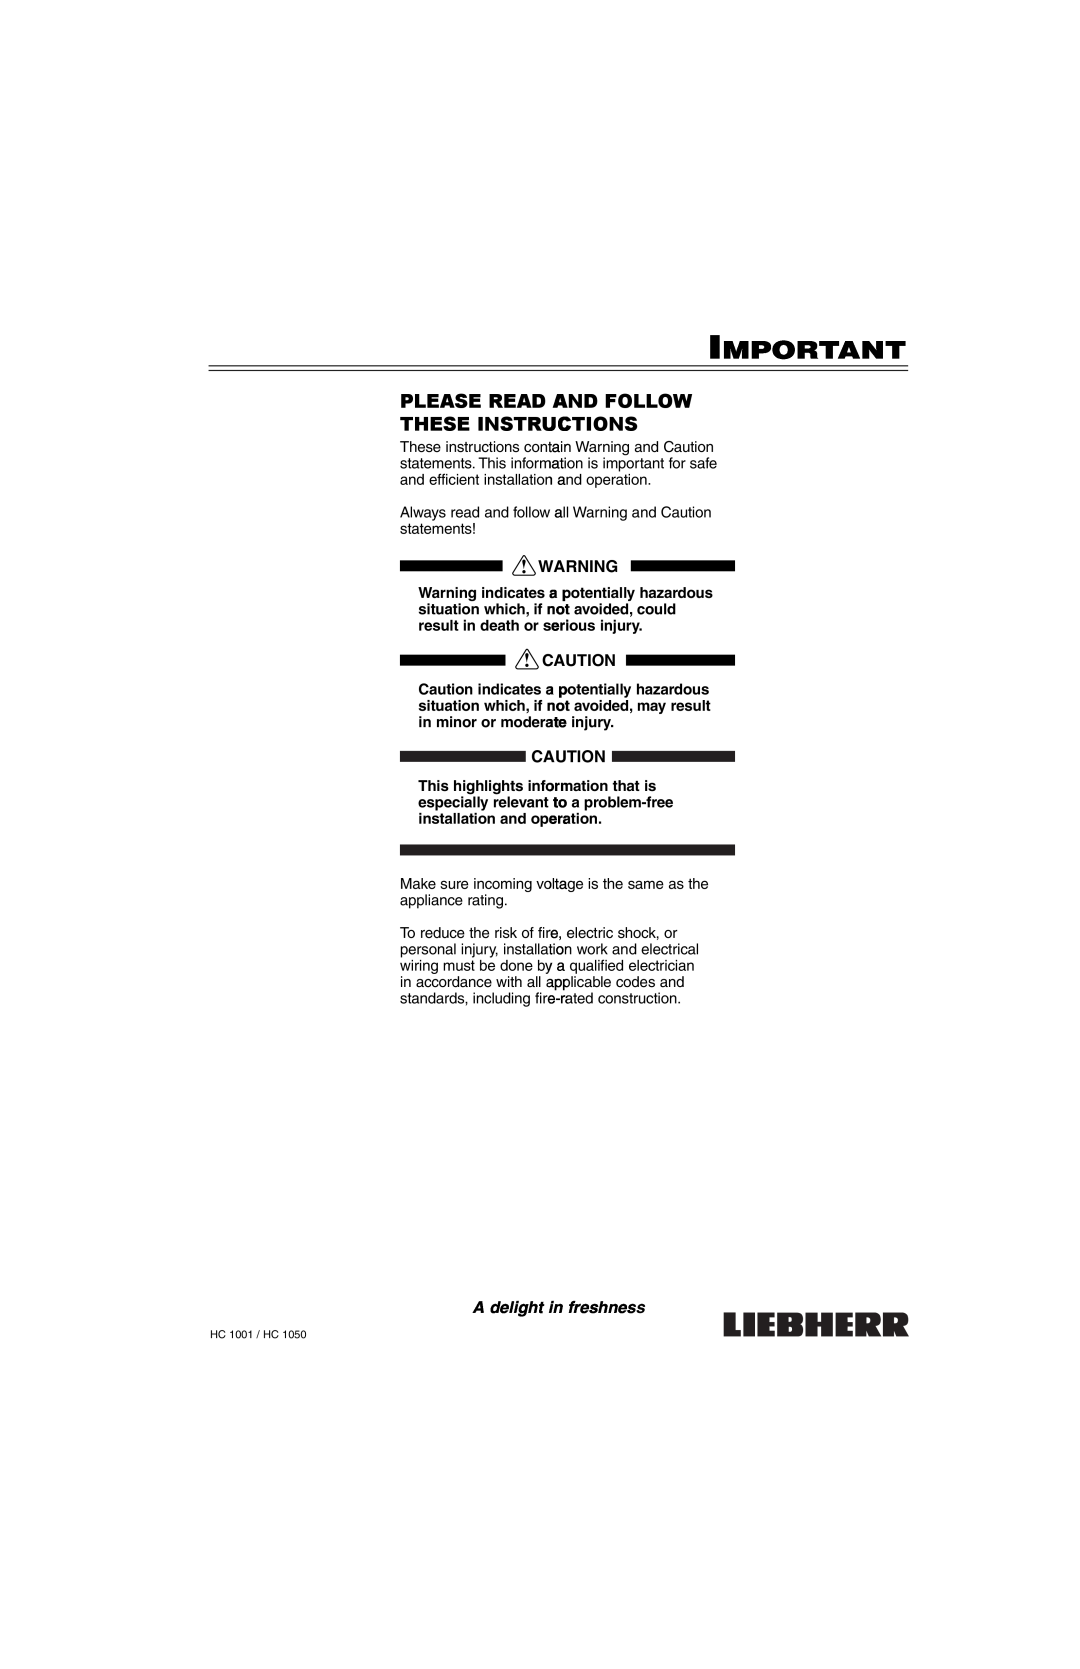 Liebherr HC1050, HC1001 installation manual Please Read And Follow These Instructions, A delight in freshness 